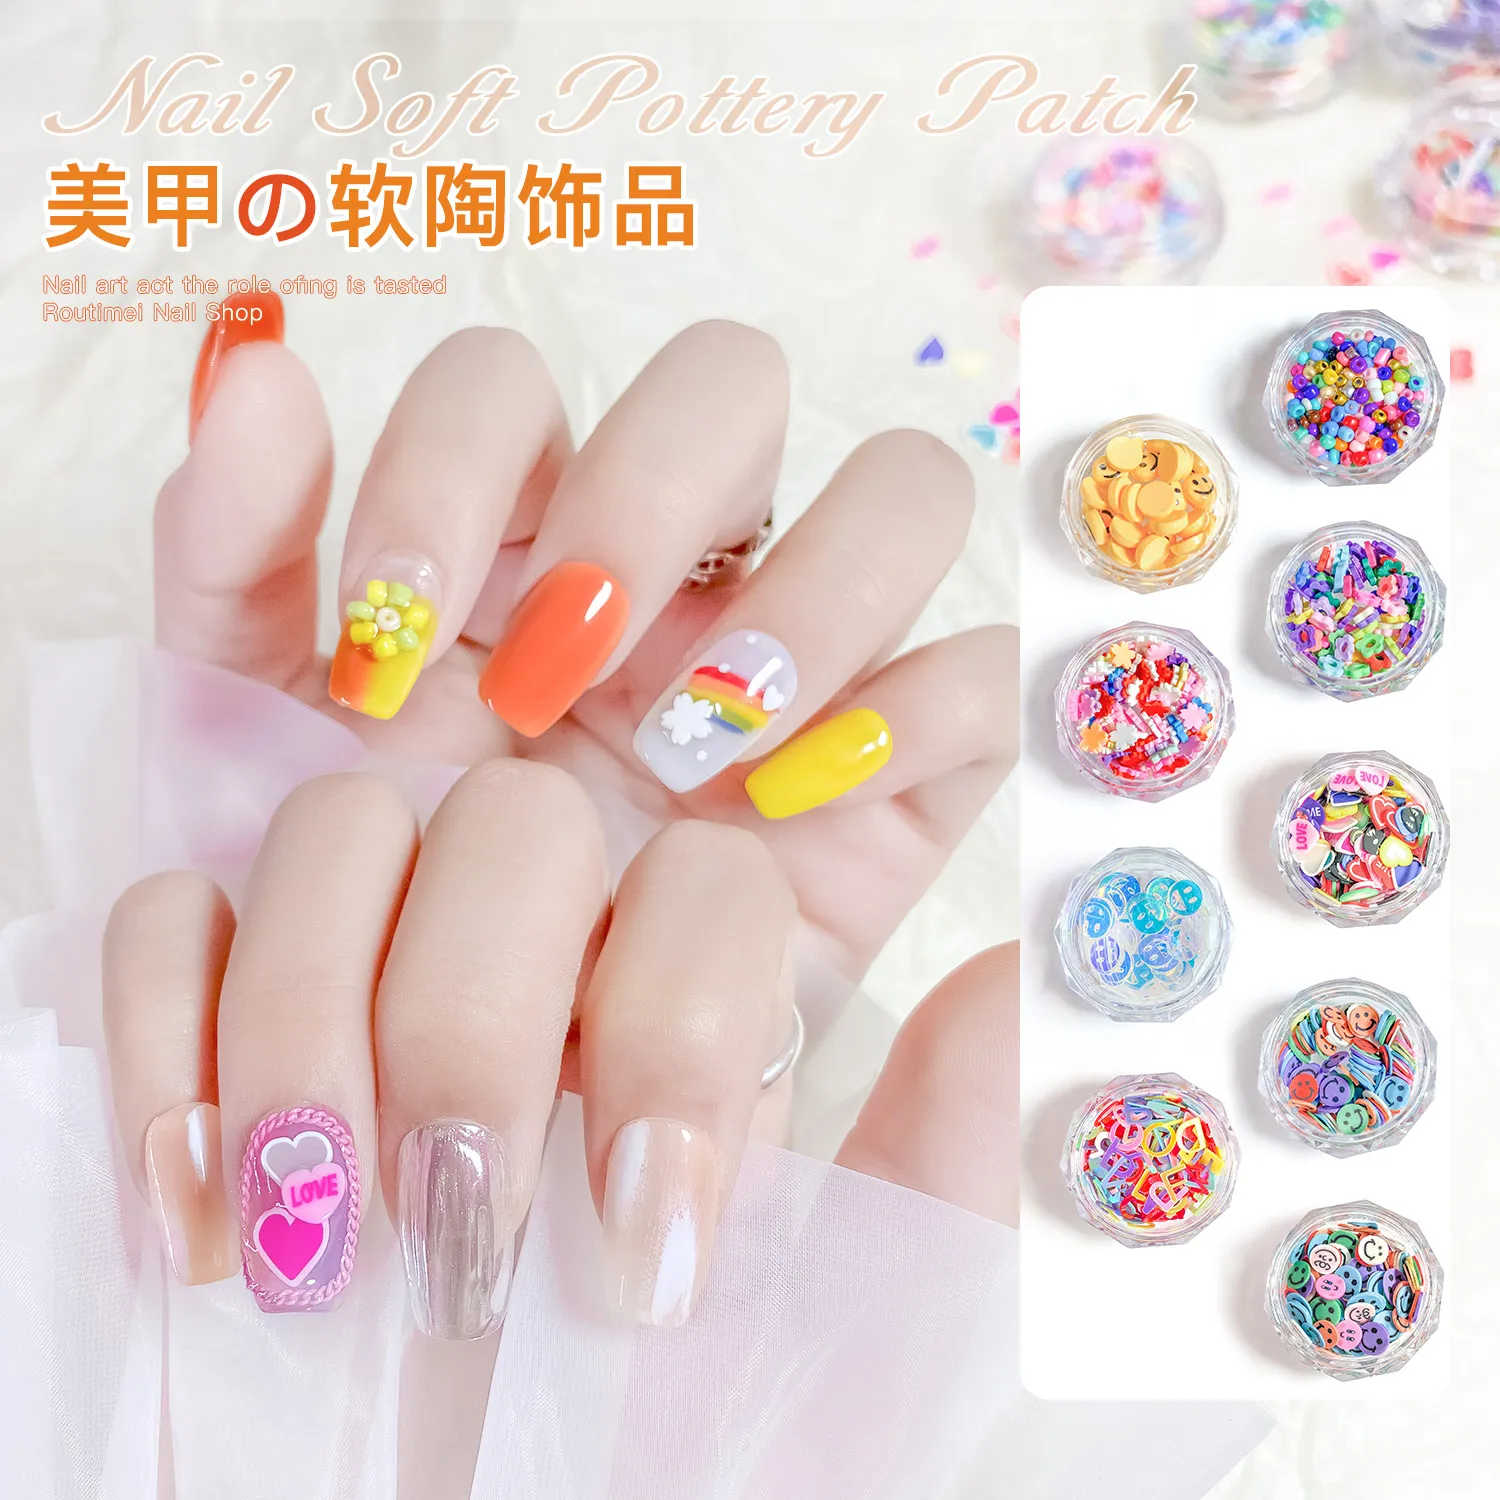 

2021 new smile pearl heart summer style candy and soft pottery slices DIY polymer clay nail art decoration, Various